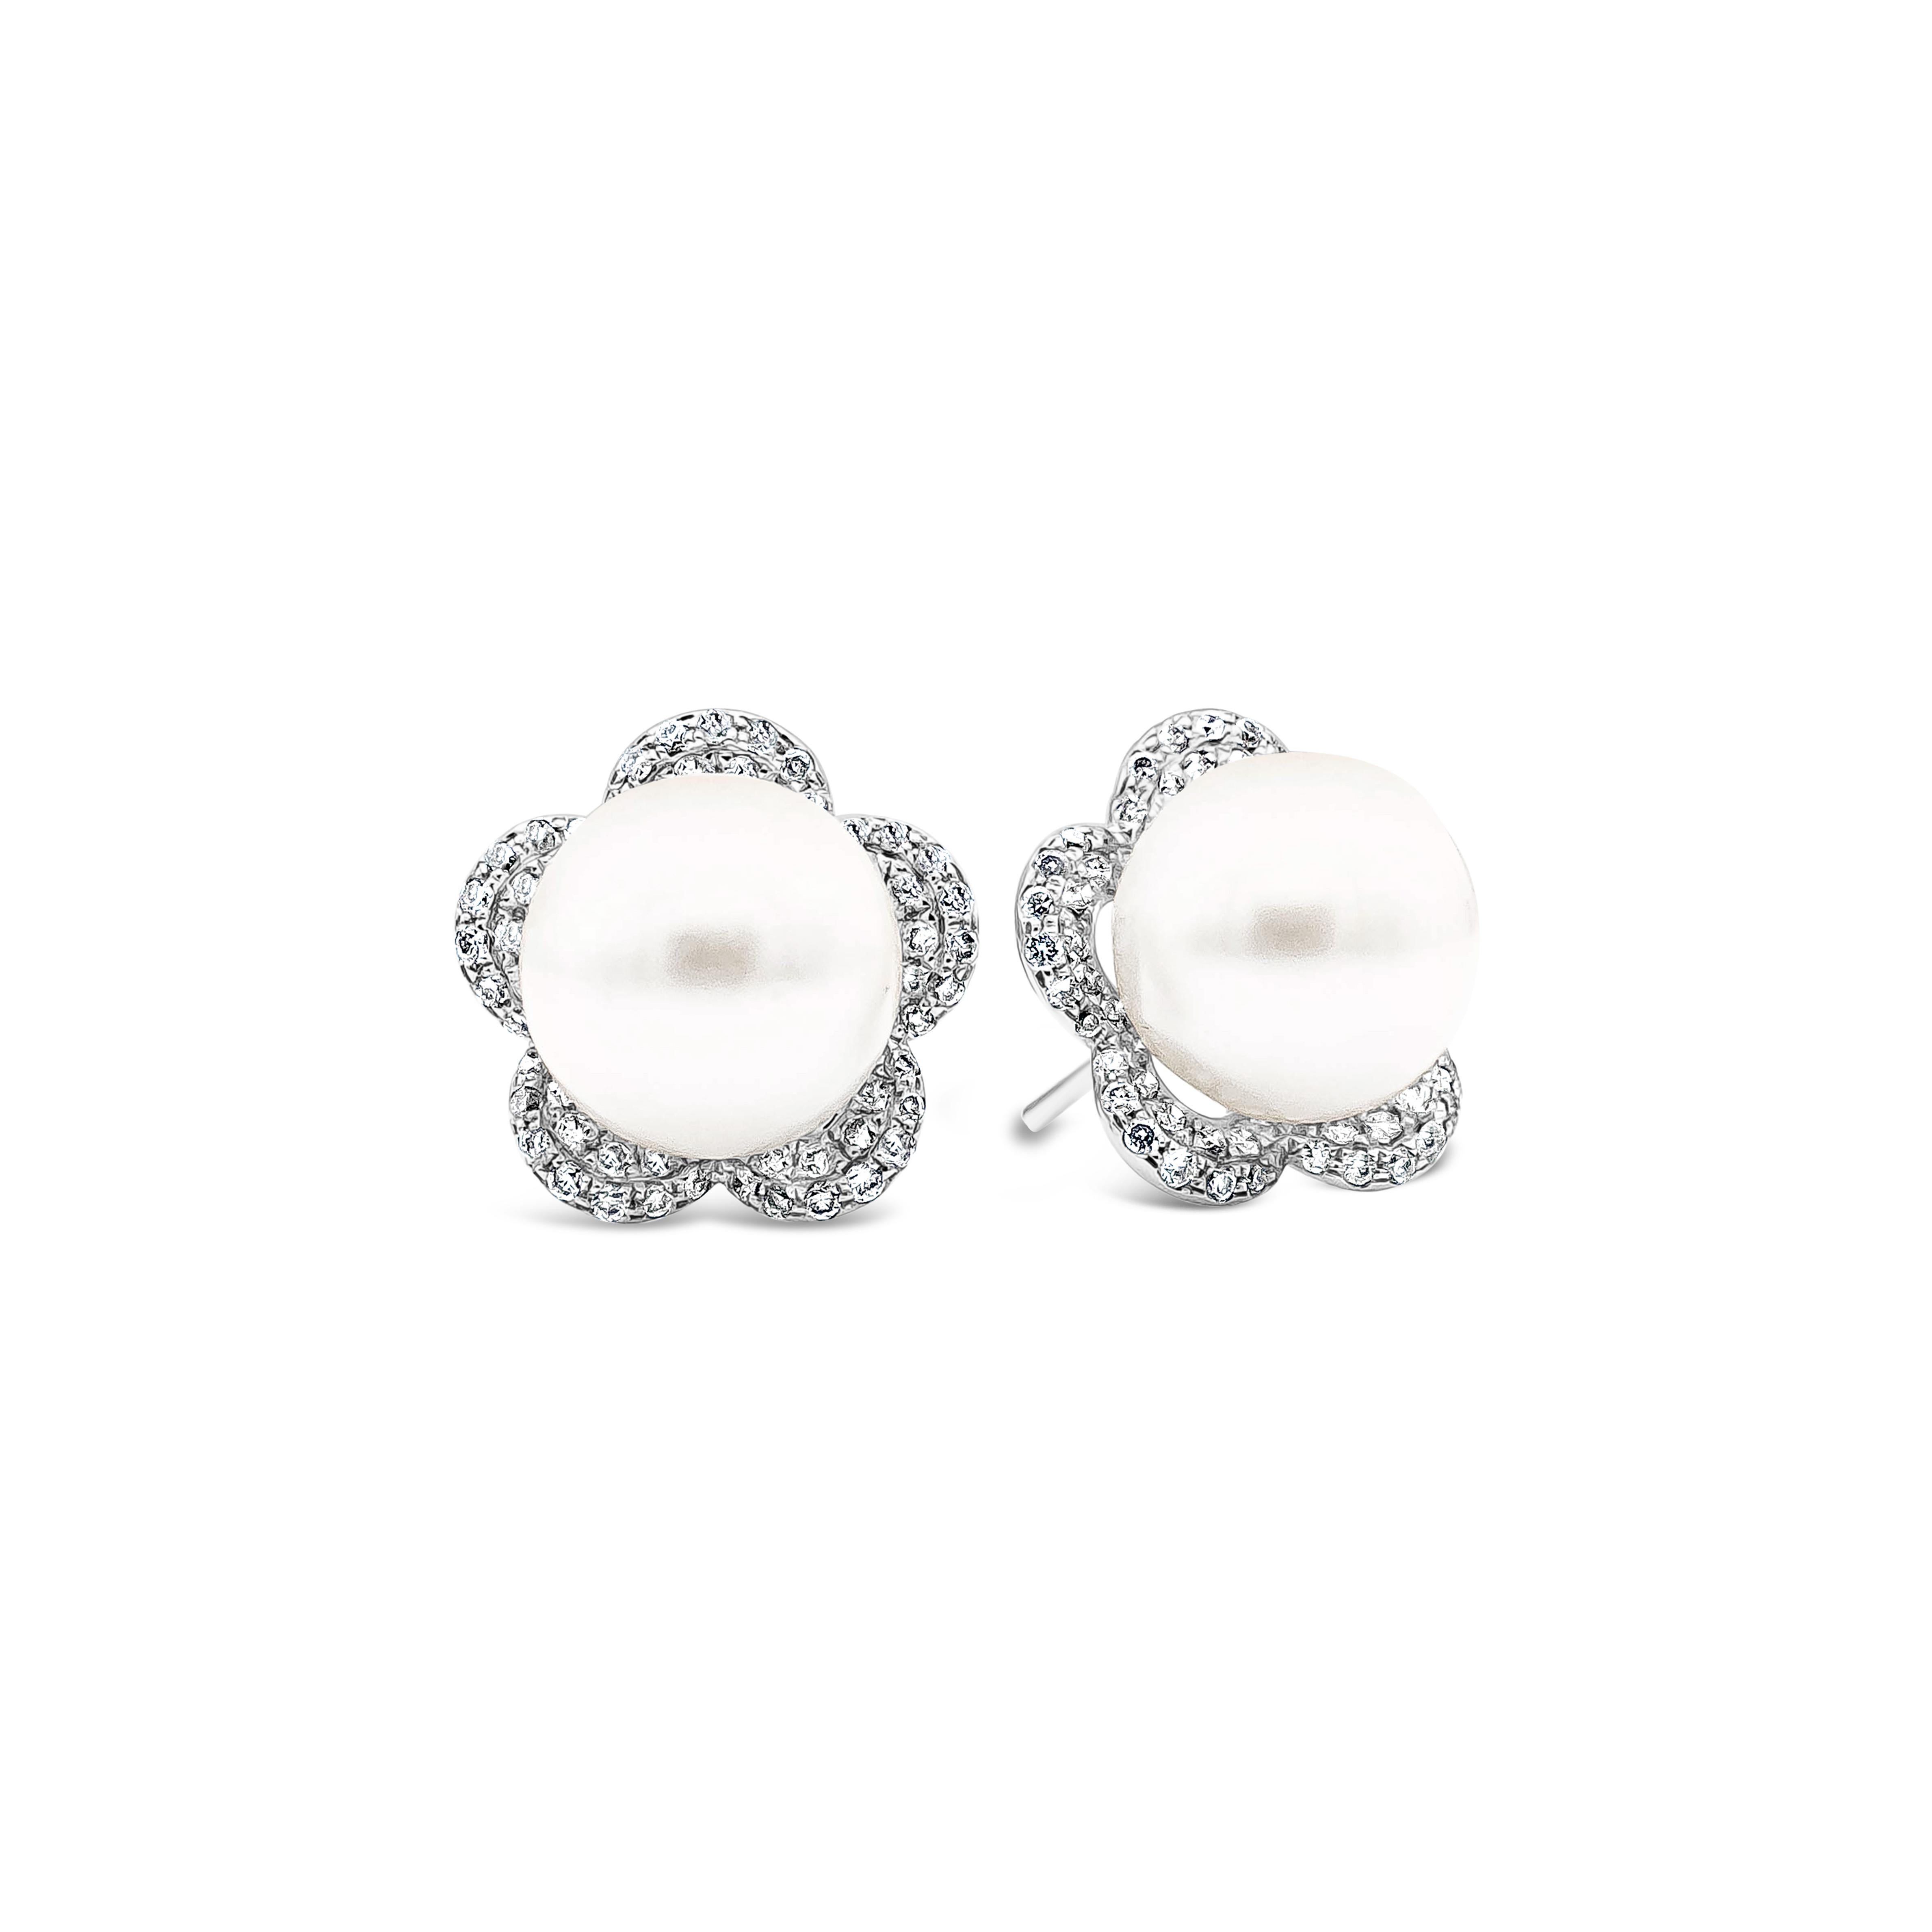 These beautiful and simple stud earrings features 2 cultured pearls each 10mm in diameter set in a floral-motif diamond surmount.Total weight of diamonds 0.73 carats. Perfectly made in 18k white gold.

Style available in different price ranges.